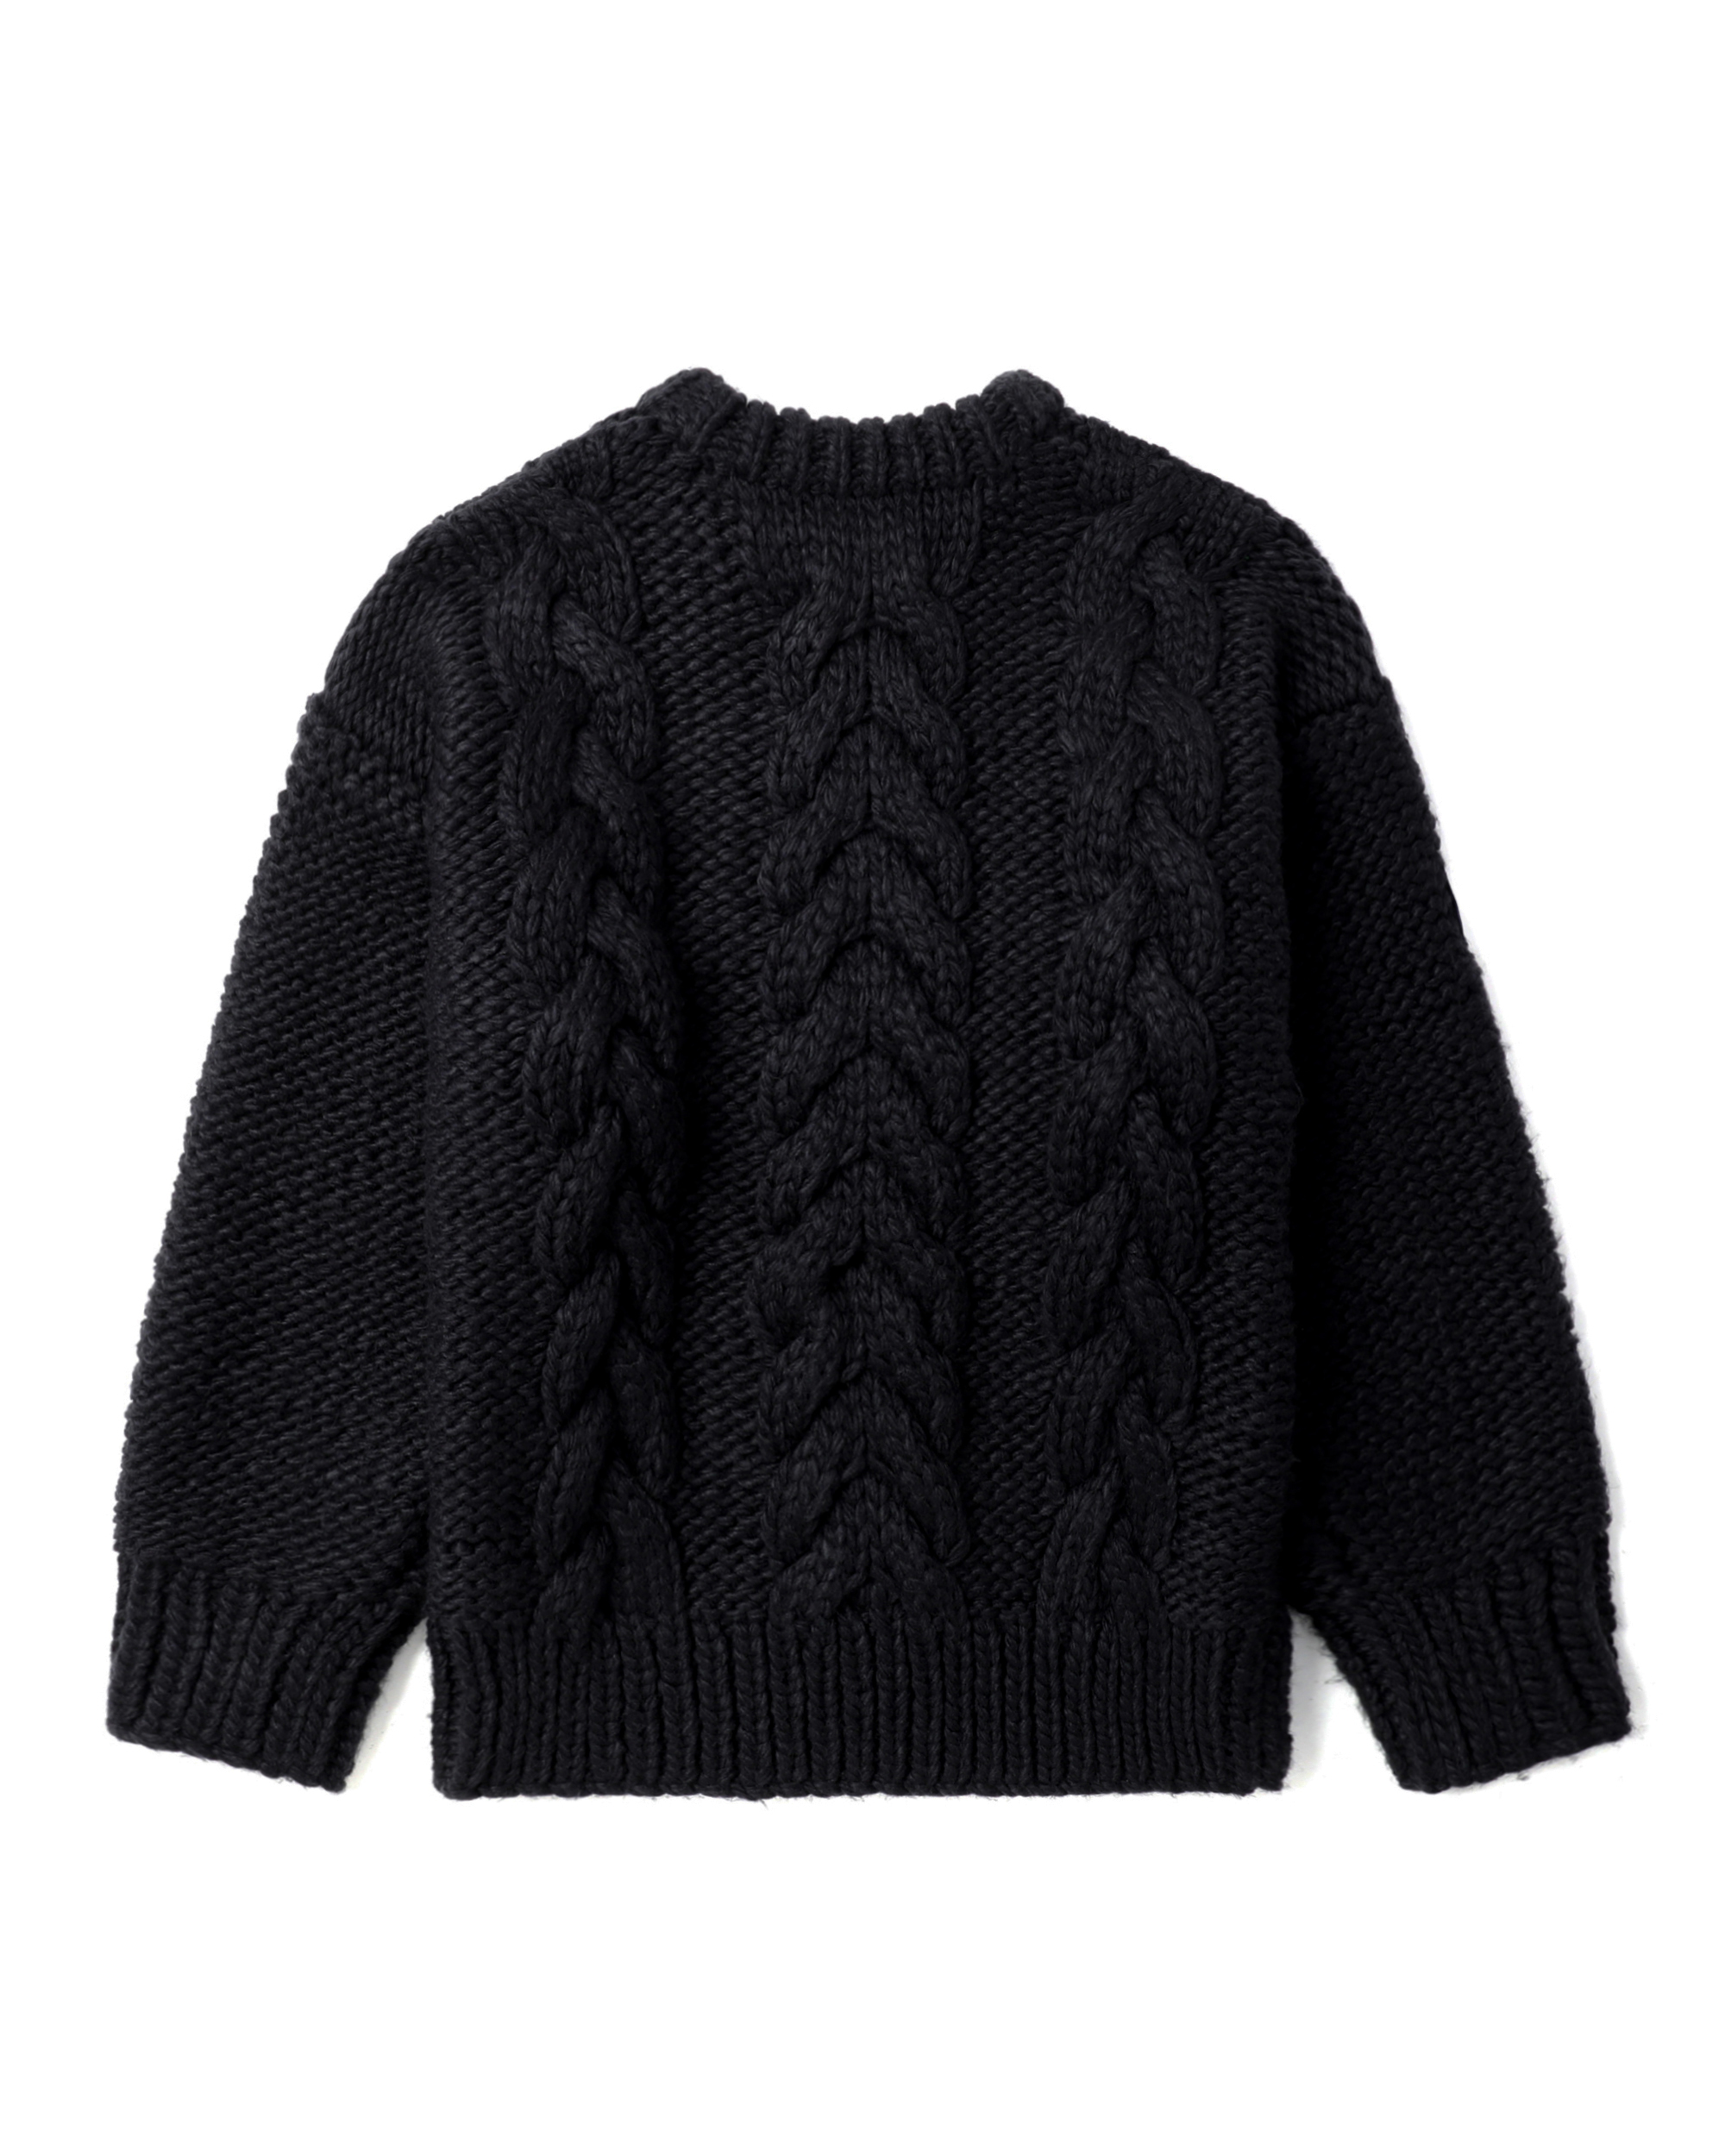 DESCENDANT Main not cable knit sweater | ITeSHOP